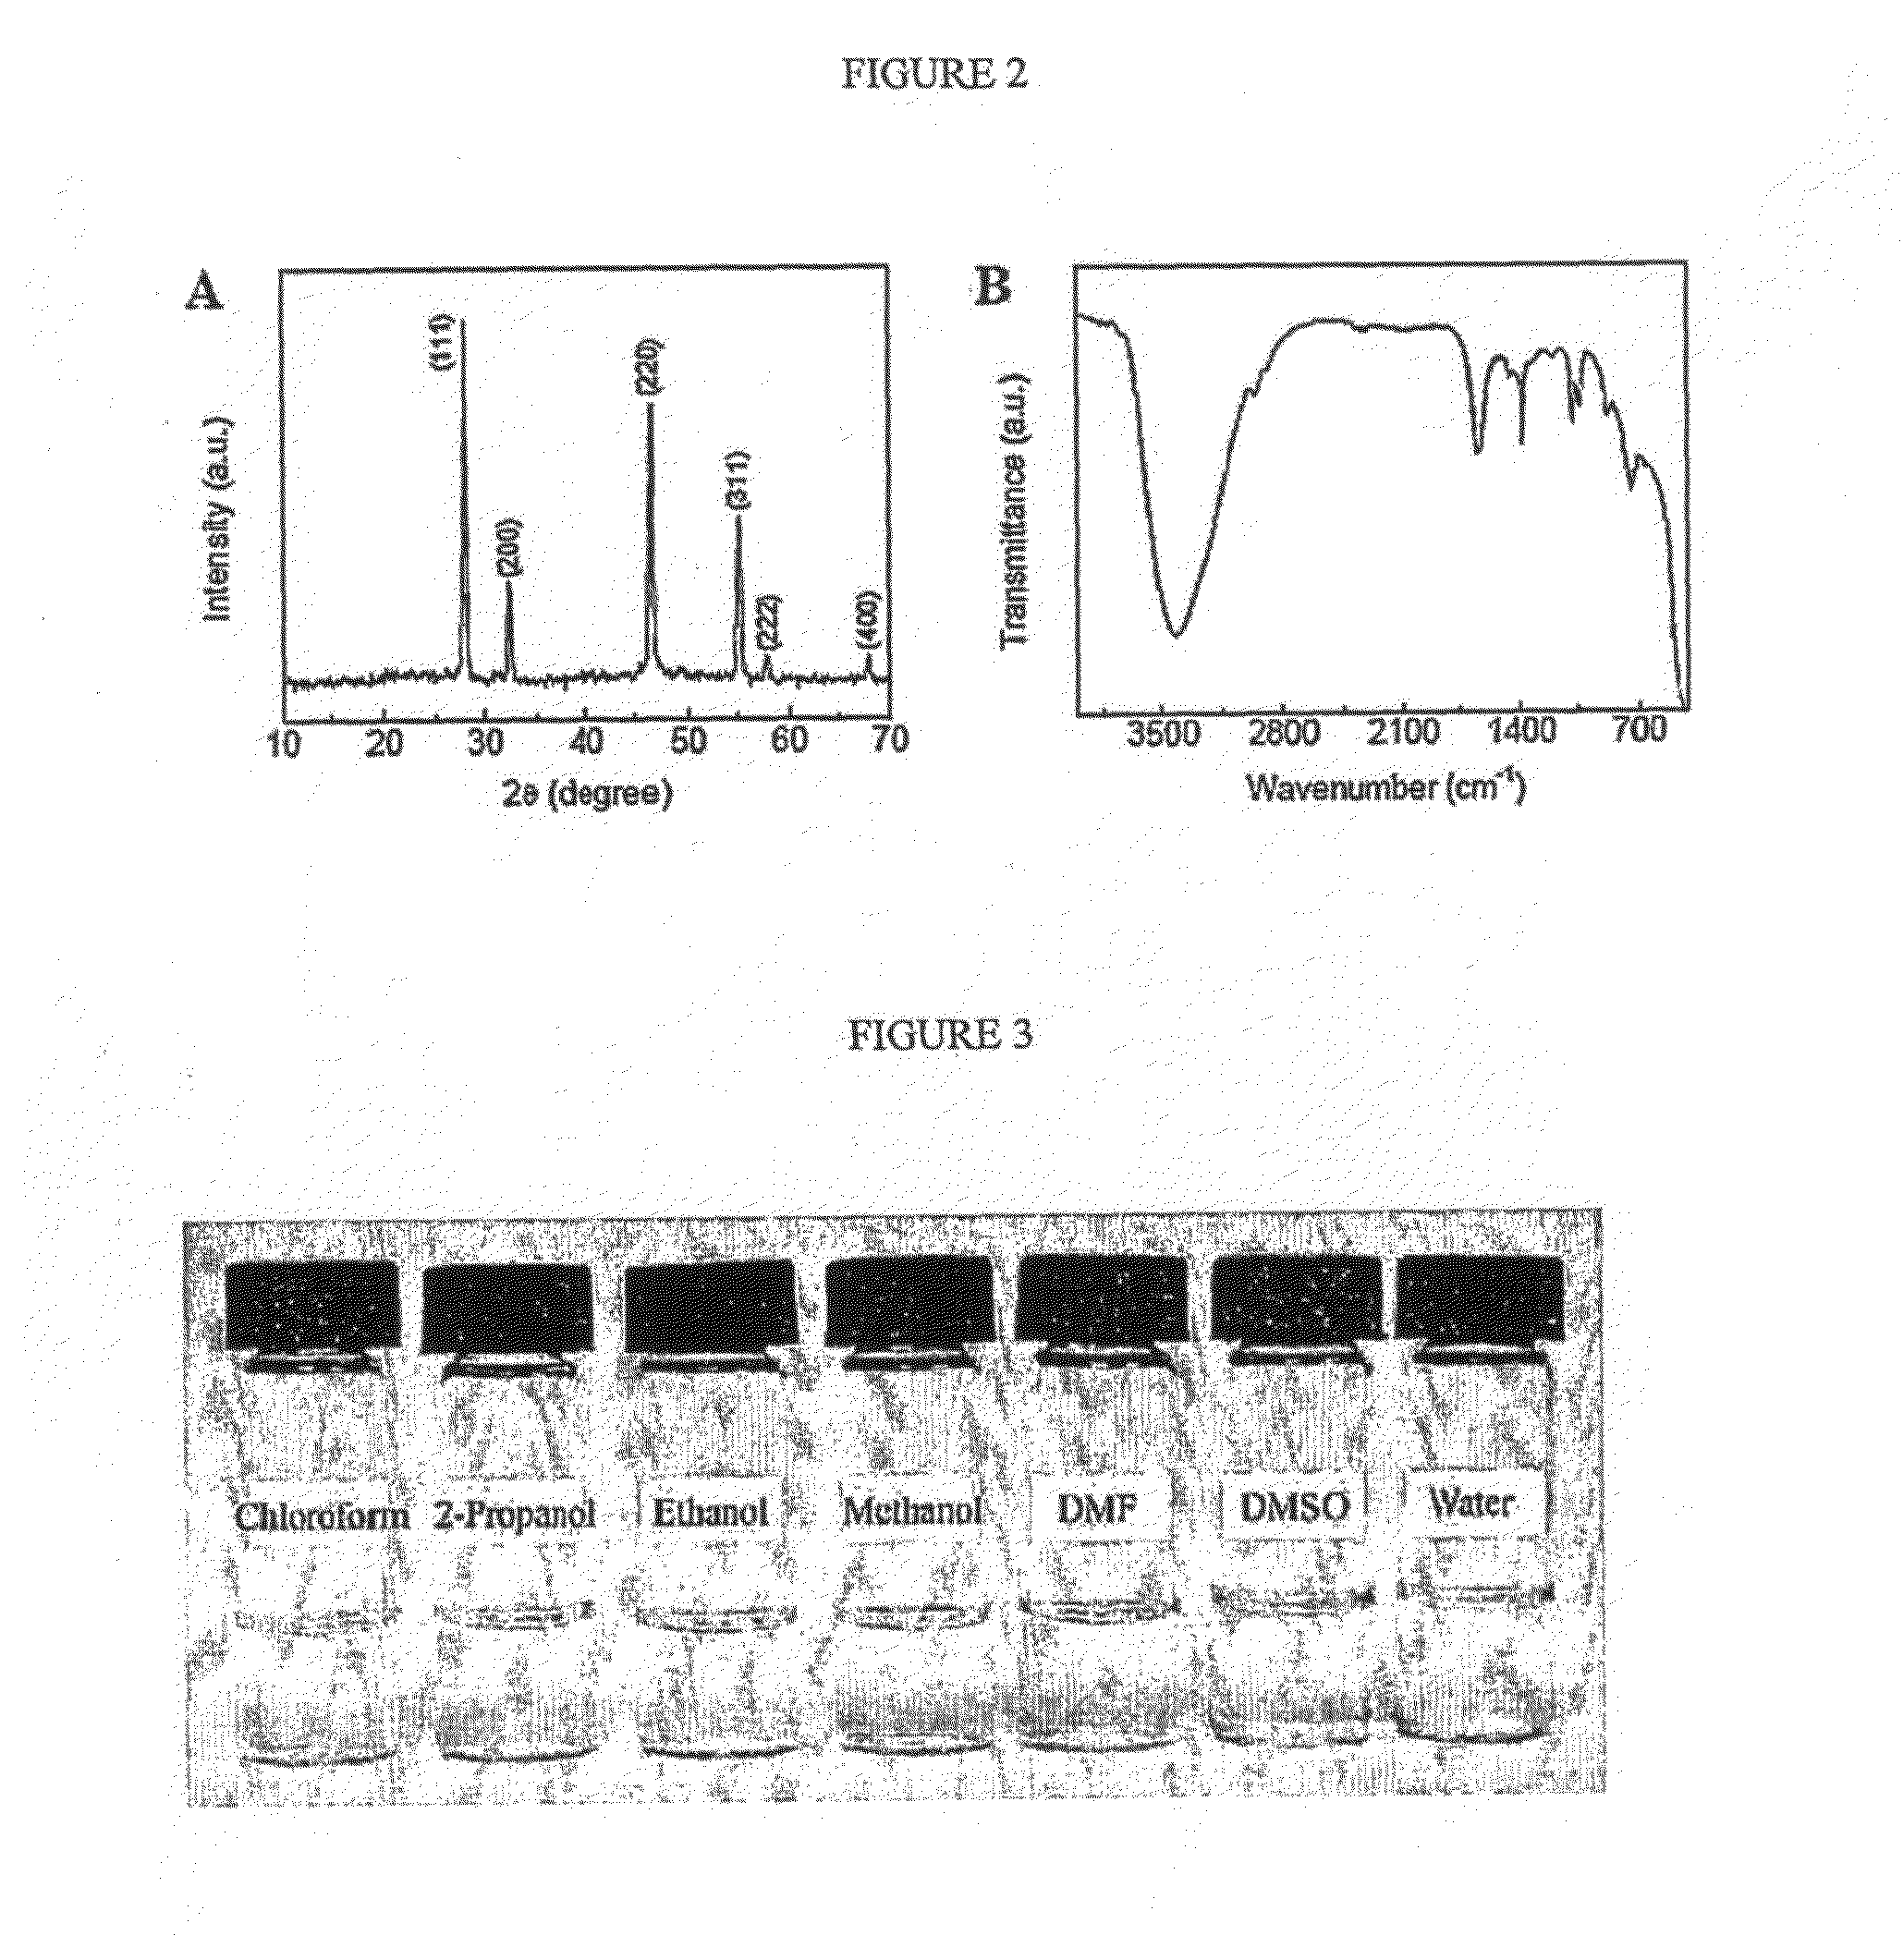 Upconversion fluorescent nano-structured material and uses thereof